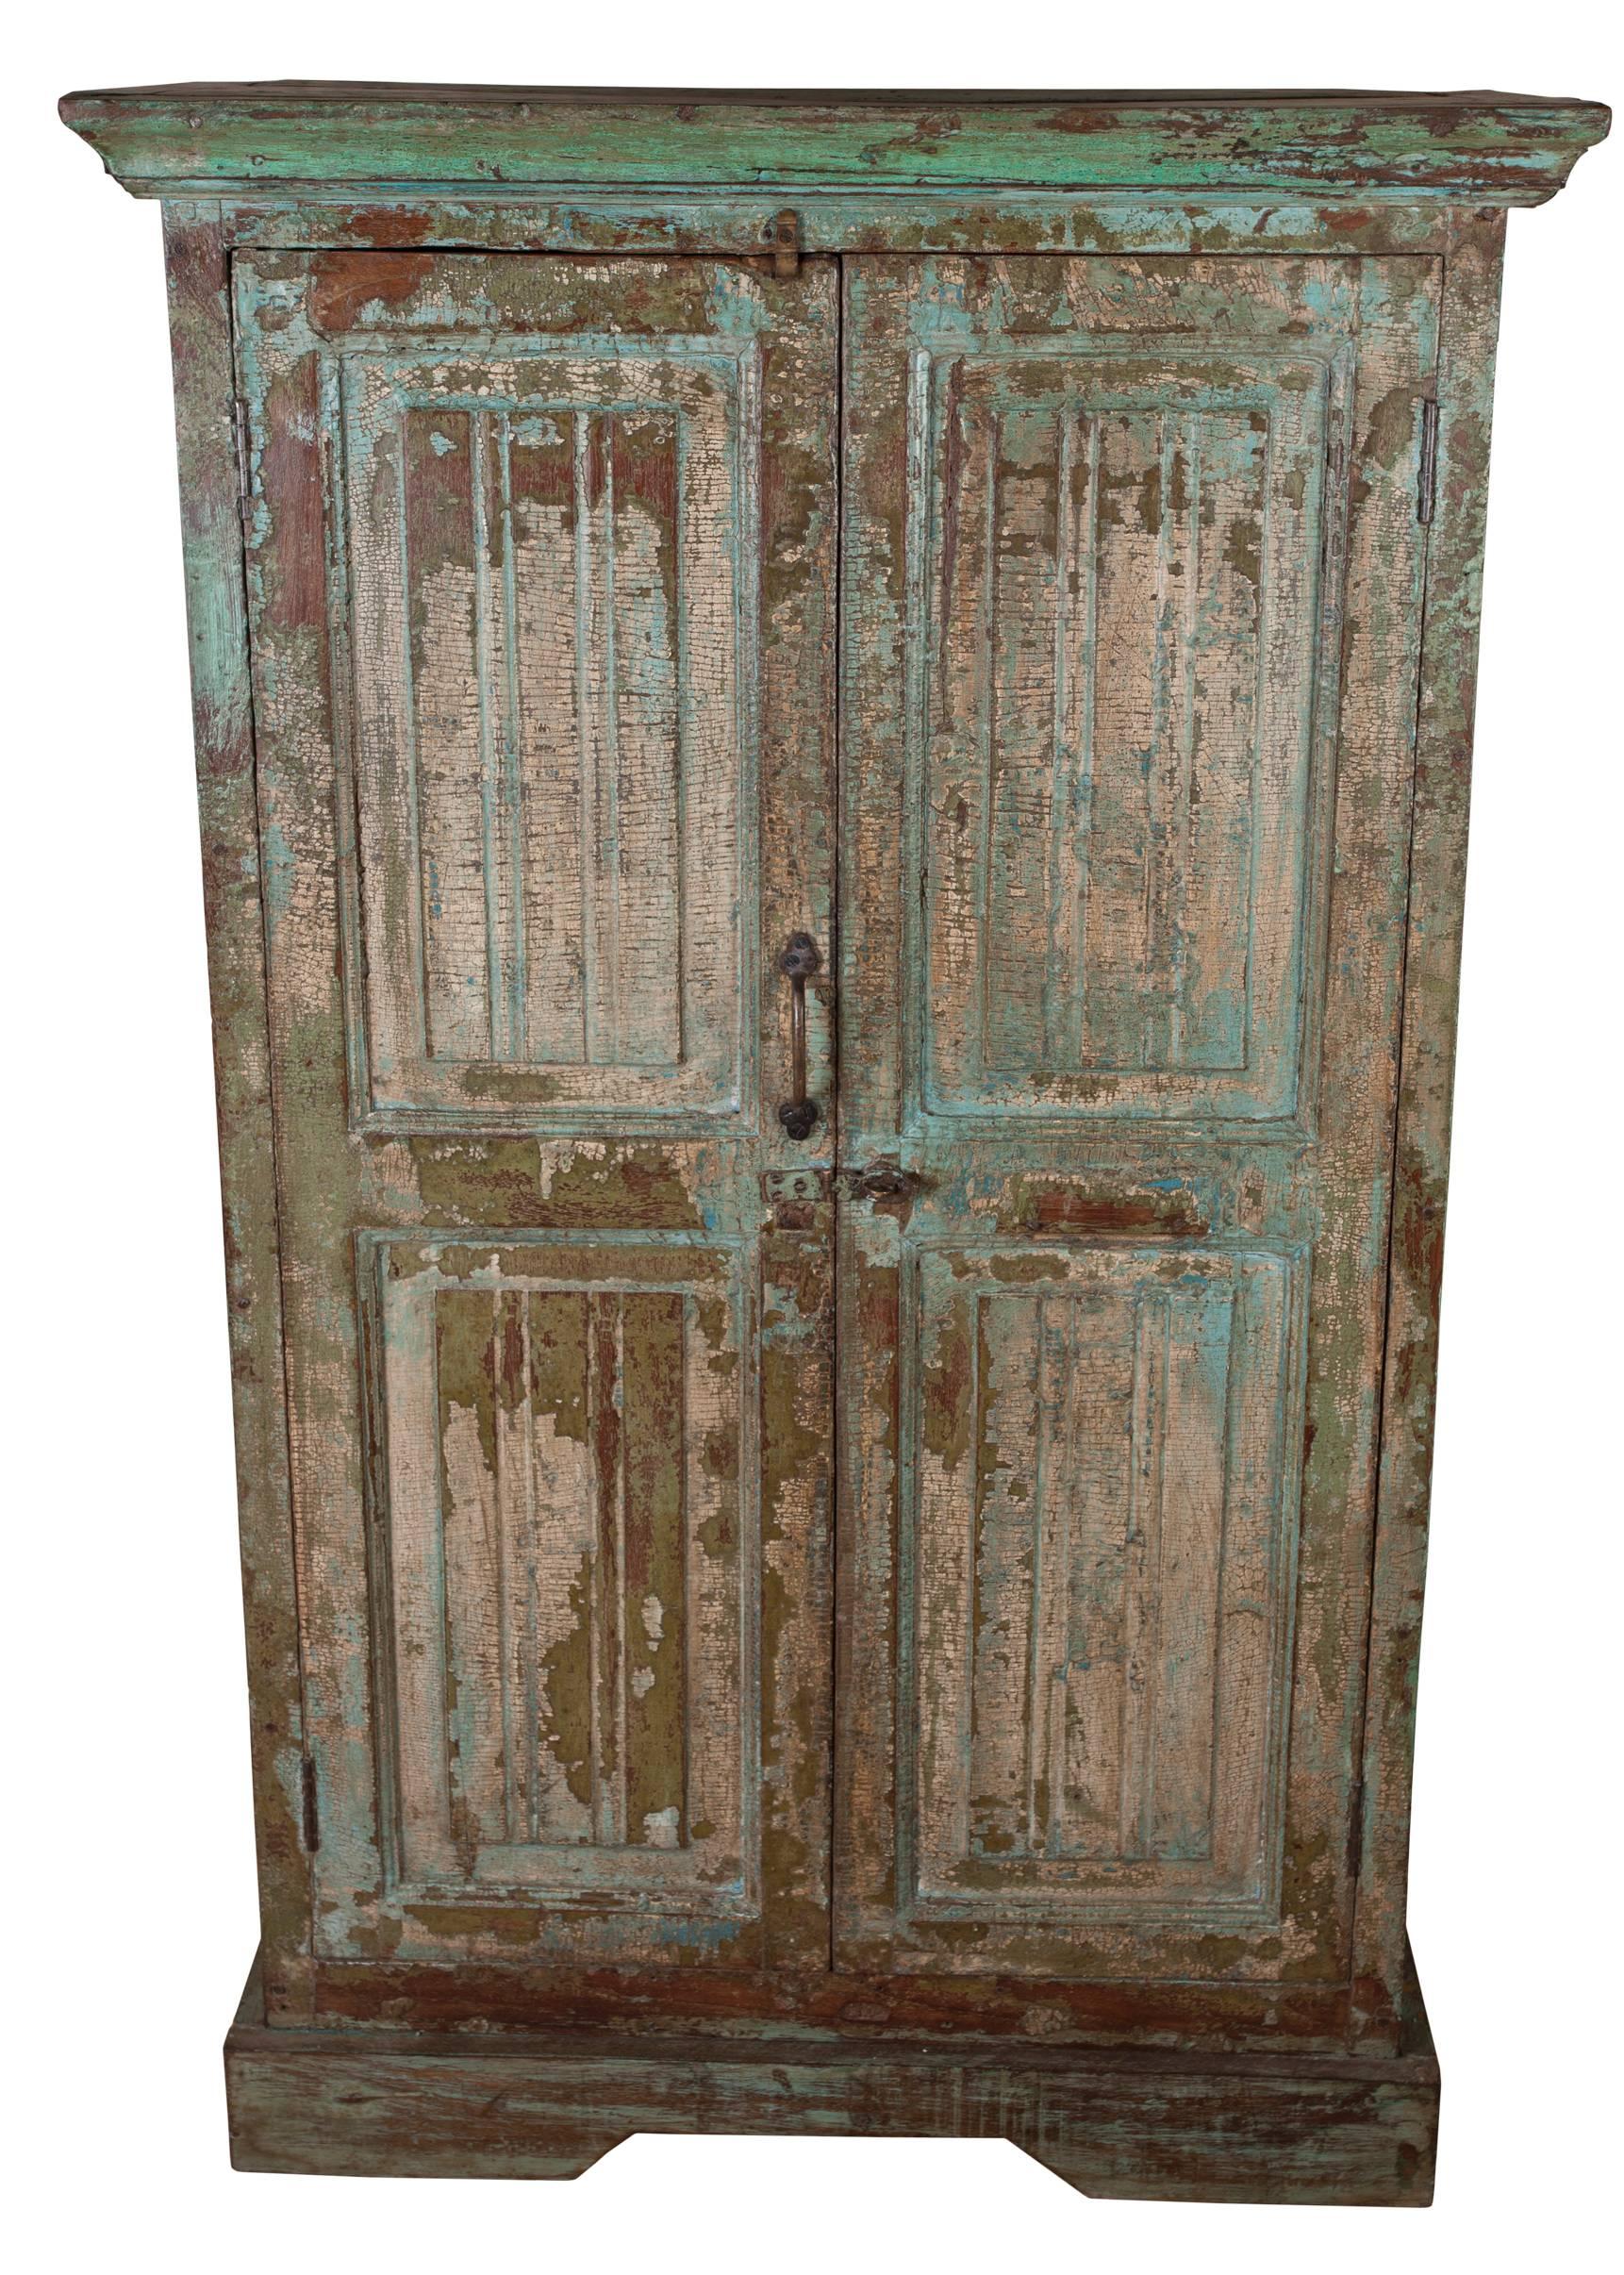 A teak cabinet with traces of its original paint. Distressed over time in a nice way. Double front doors and interior shelf, with a hasp closure. Raised panels on the door fronts, and attached top molding which adds 2